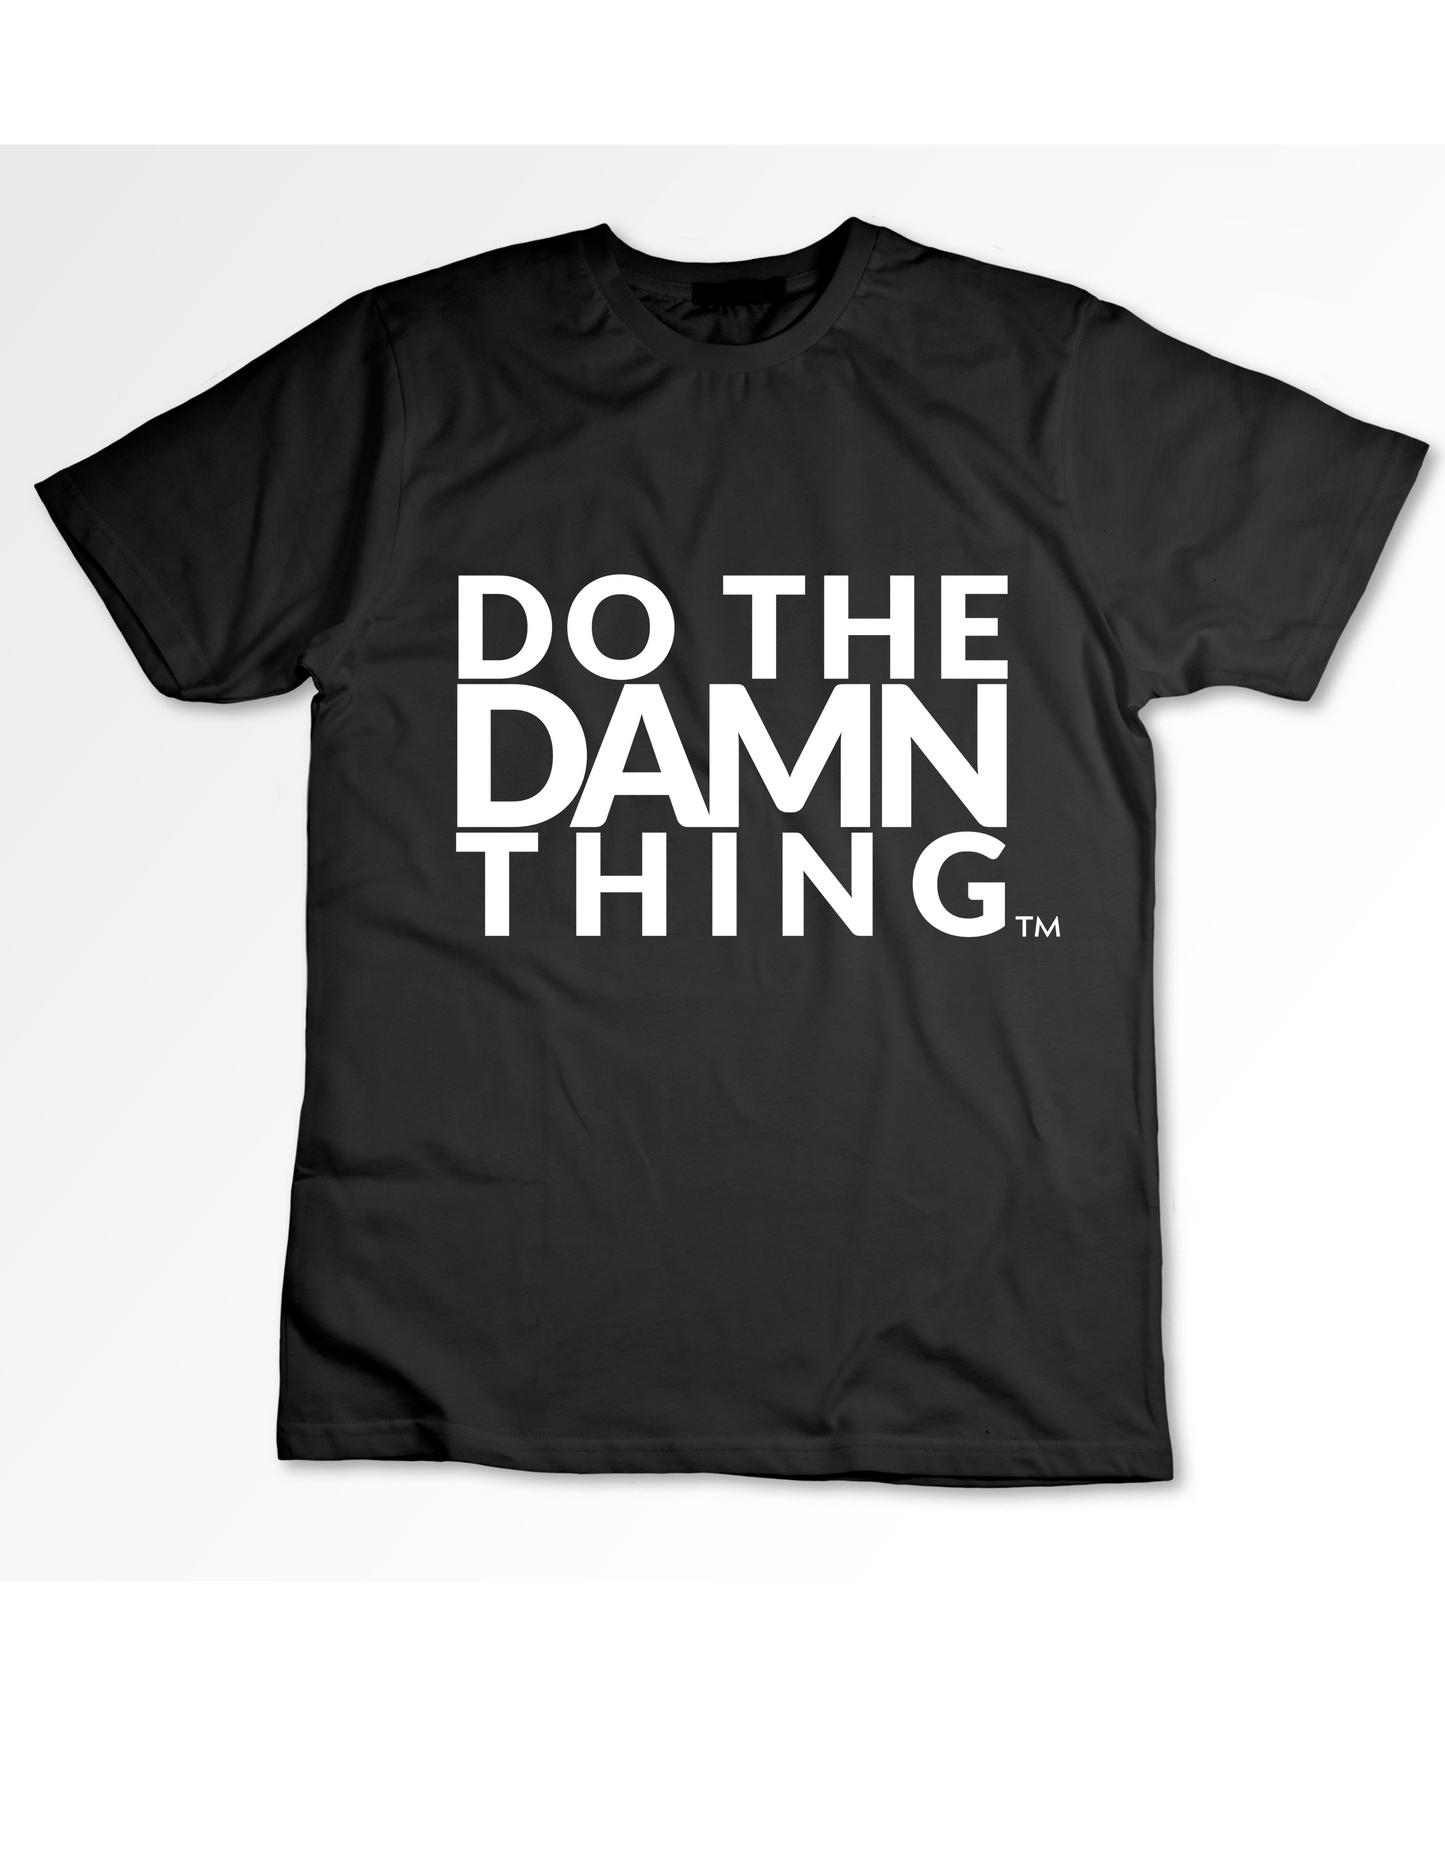 DO THE DAMN THING™ Official Statement Shirt